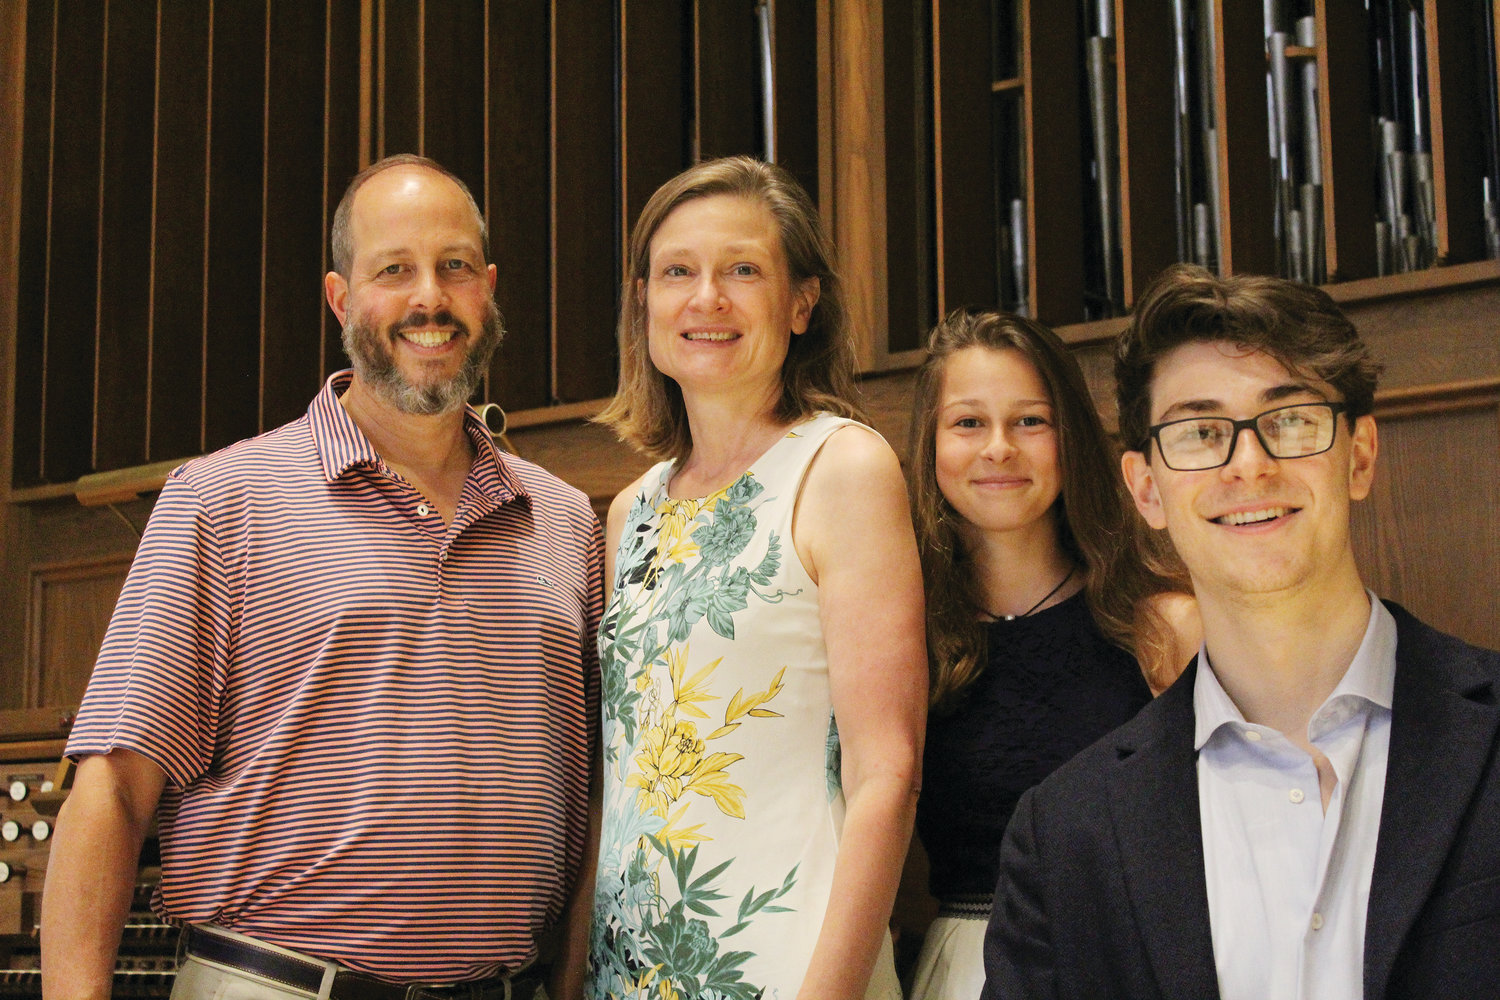 Bishop Thomas J. Tobin, family and friends were present for Schneider’s June 25 organ recital that marked his final concert as a student at the Pontifical Institute of Sacred Music.